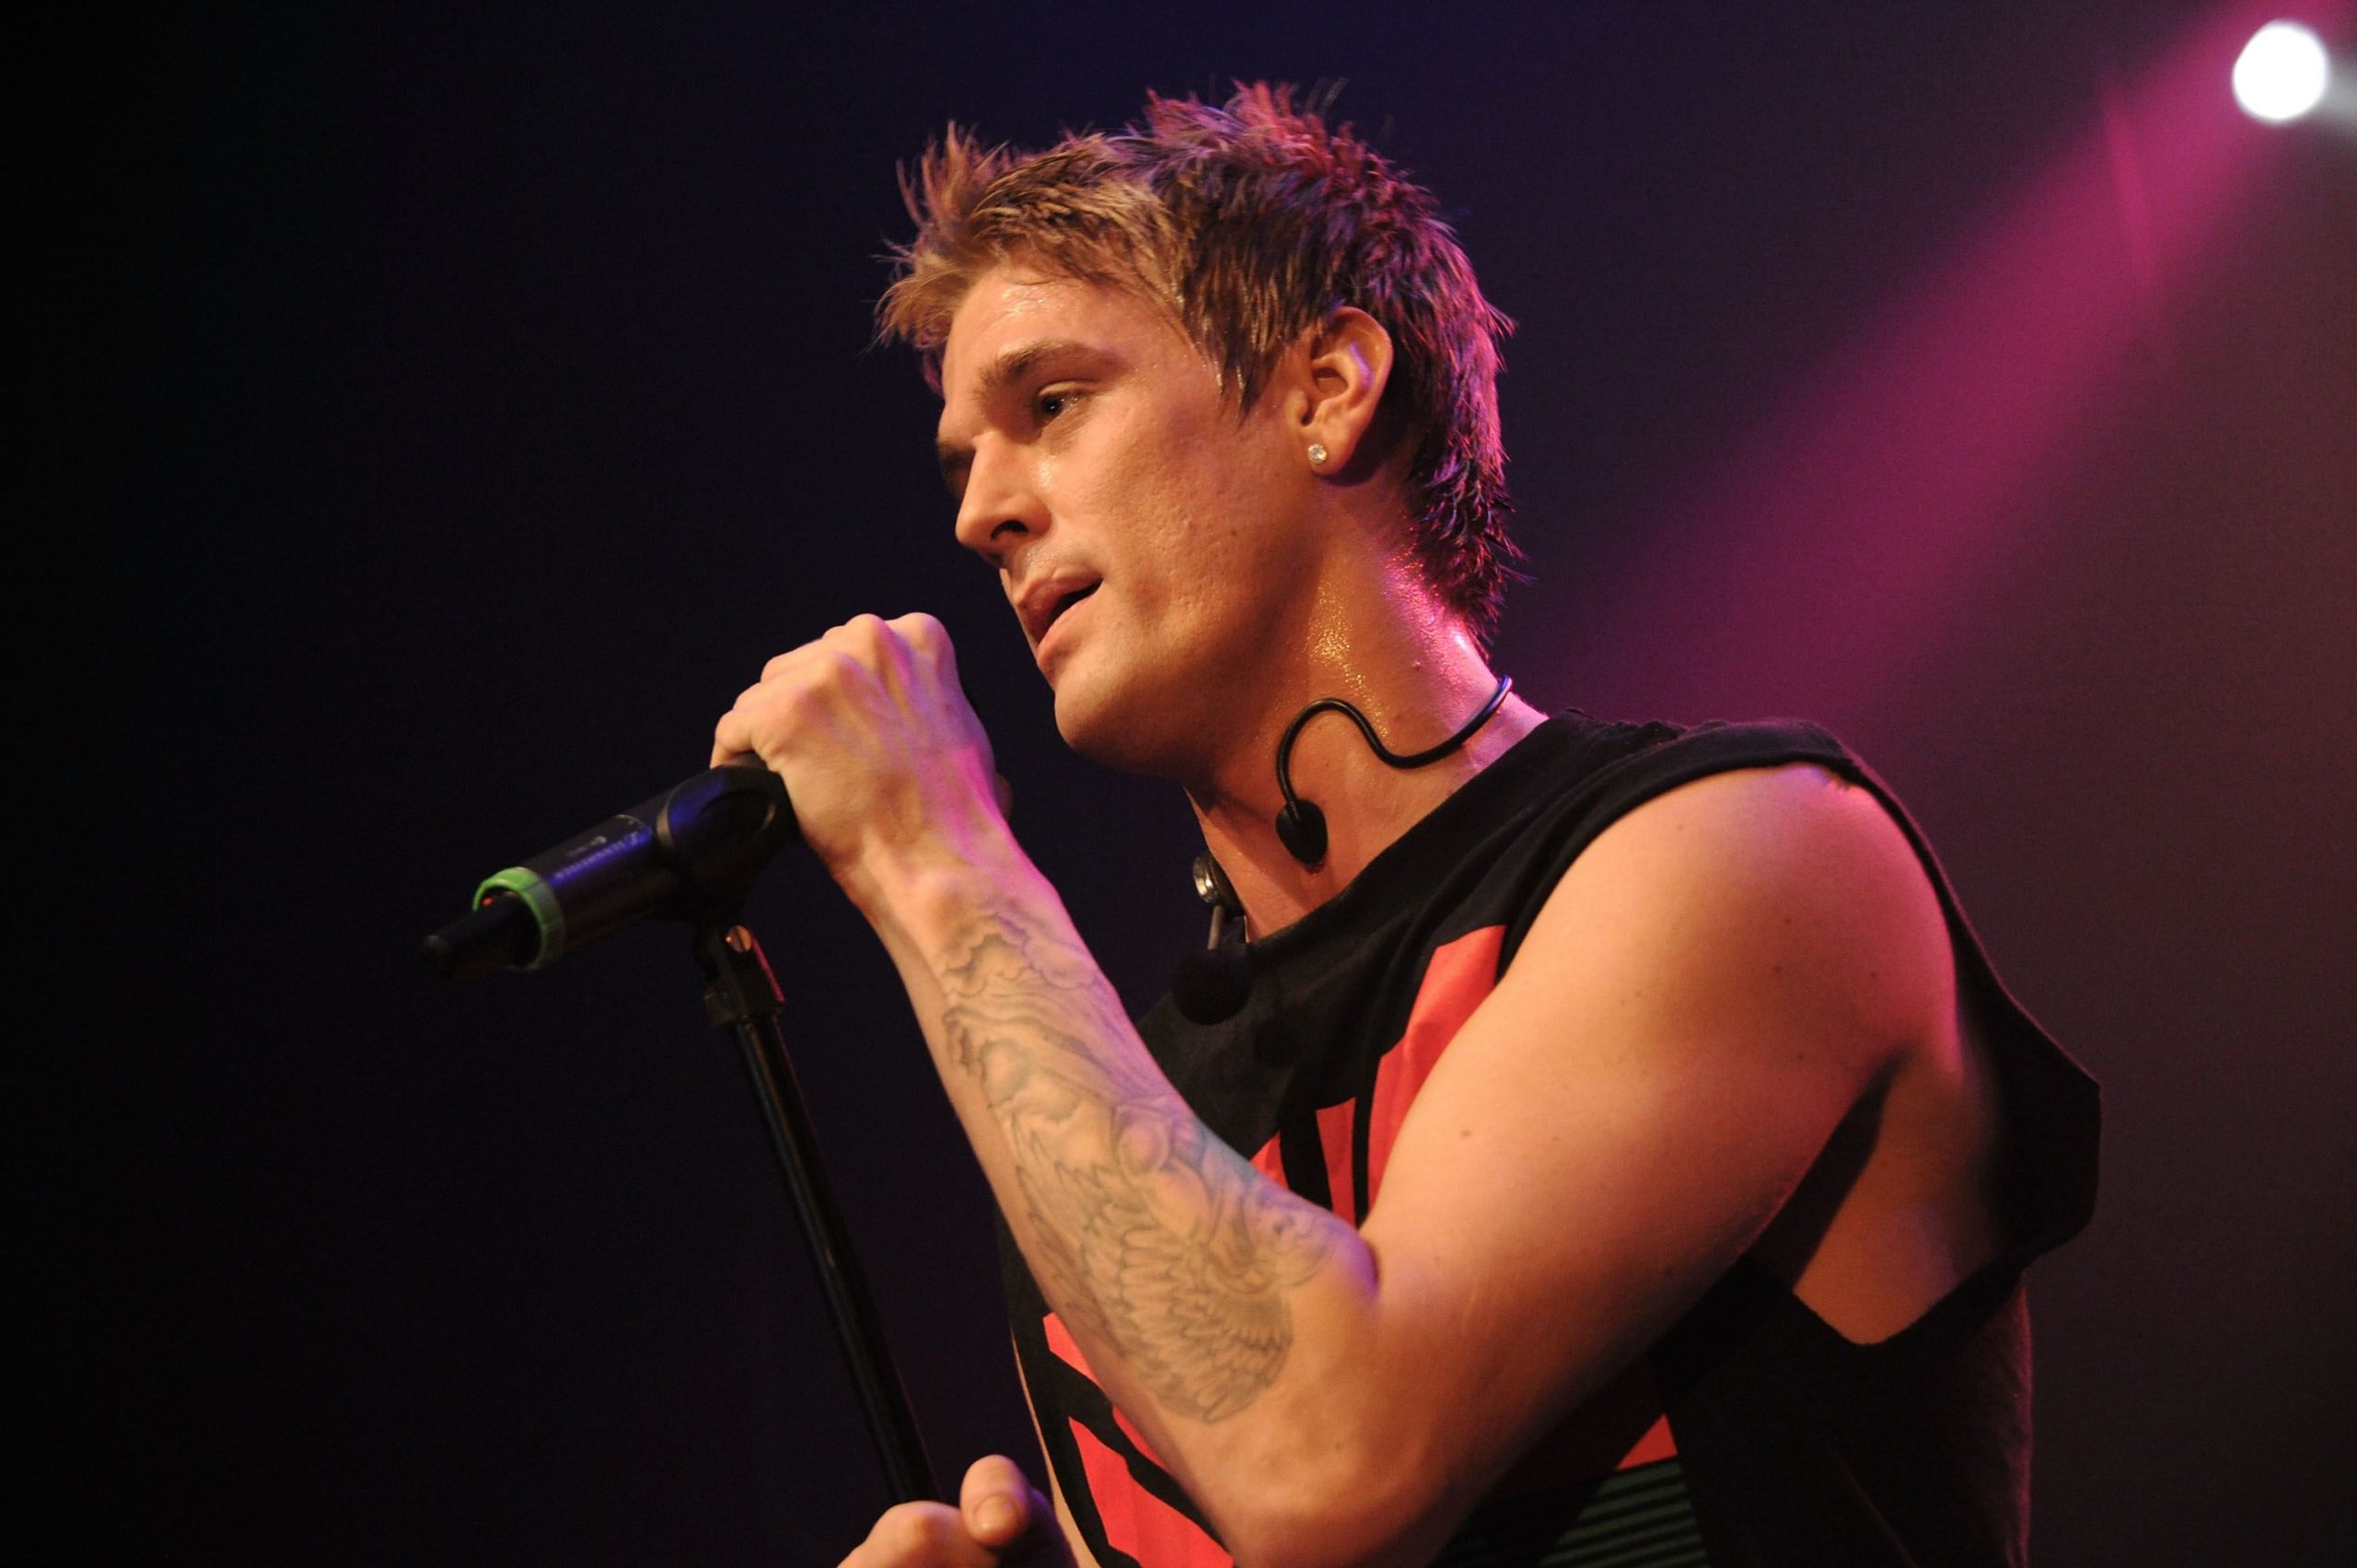 Aaron Carter was addicted to huffing compressed air